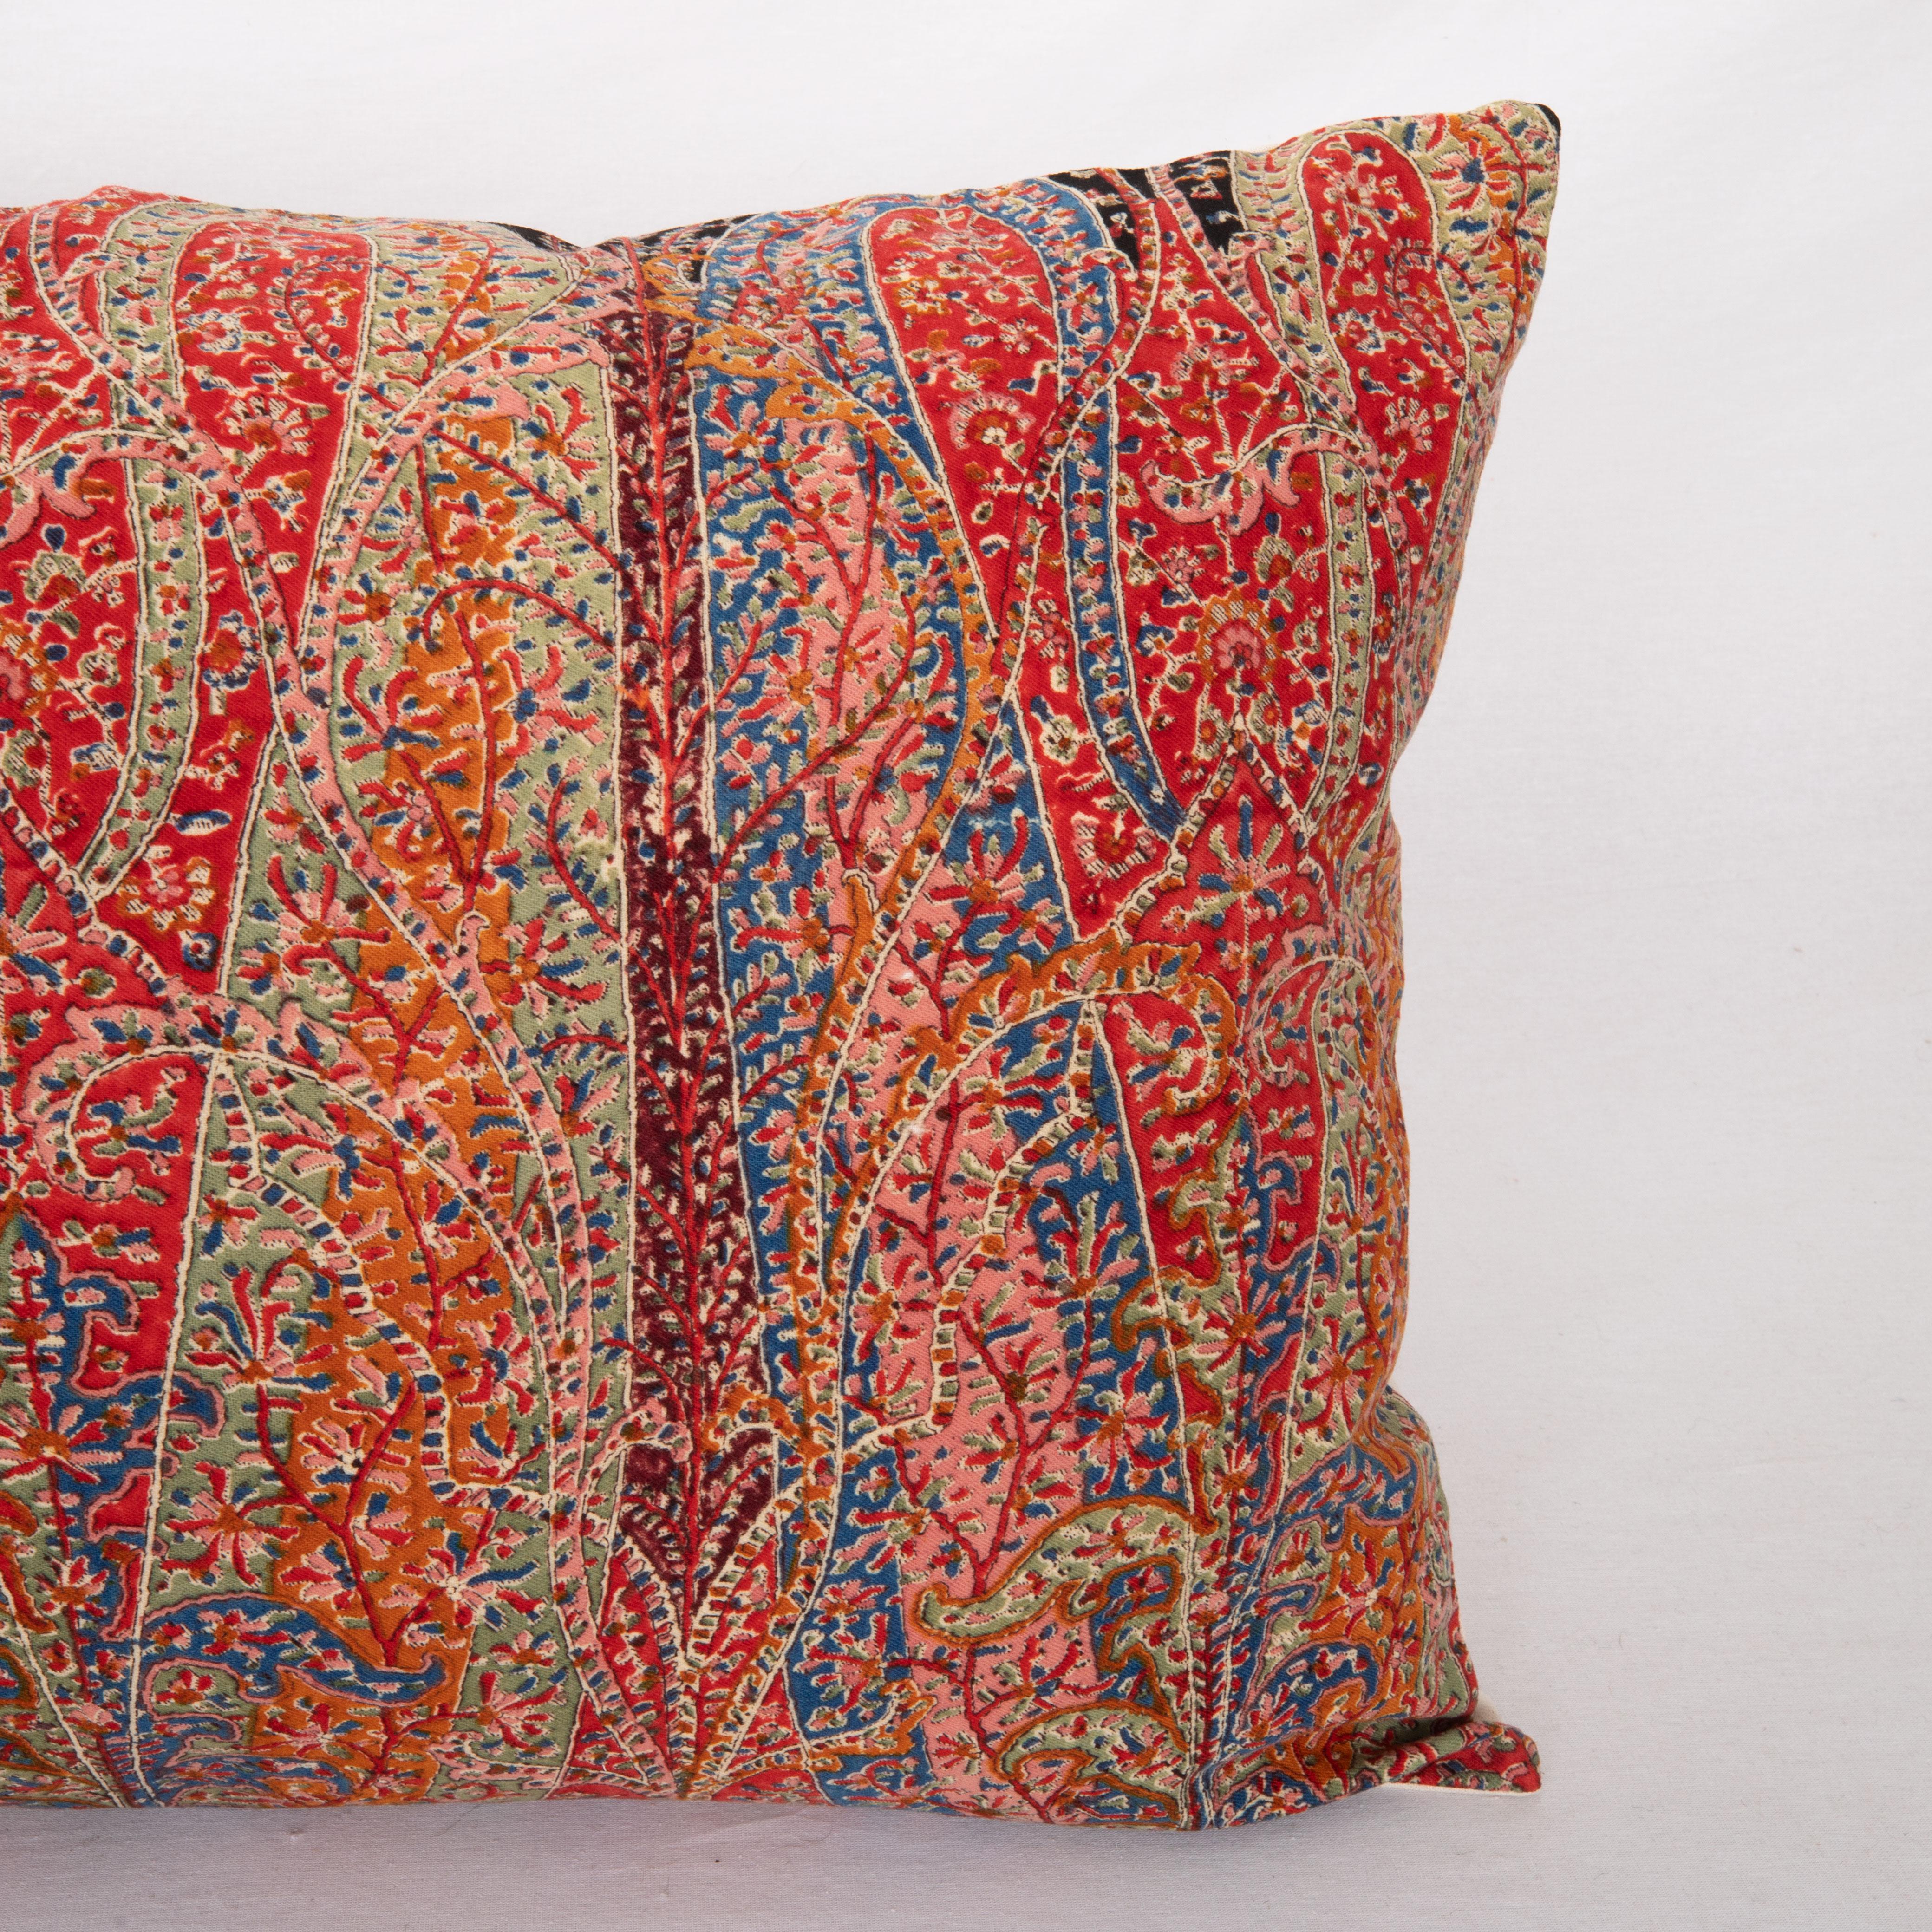 Woven Pillow Cover Made from a an Antique Printed Scottish Paisley Shawl    For Sale